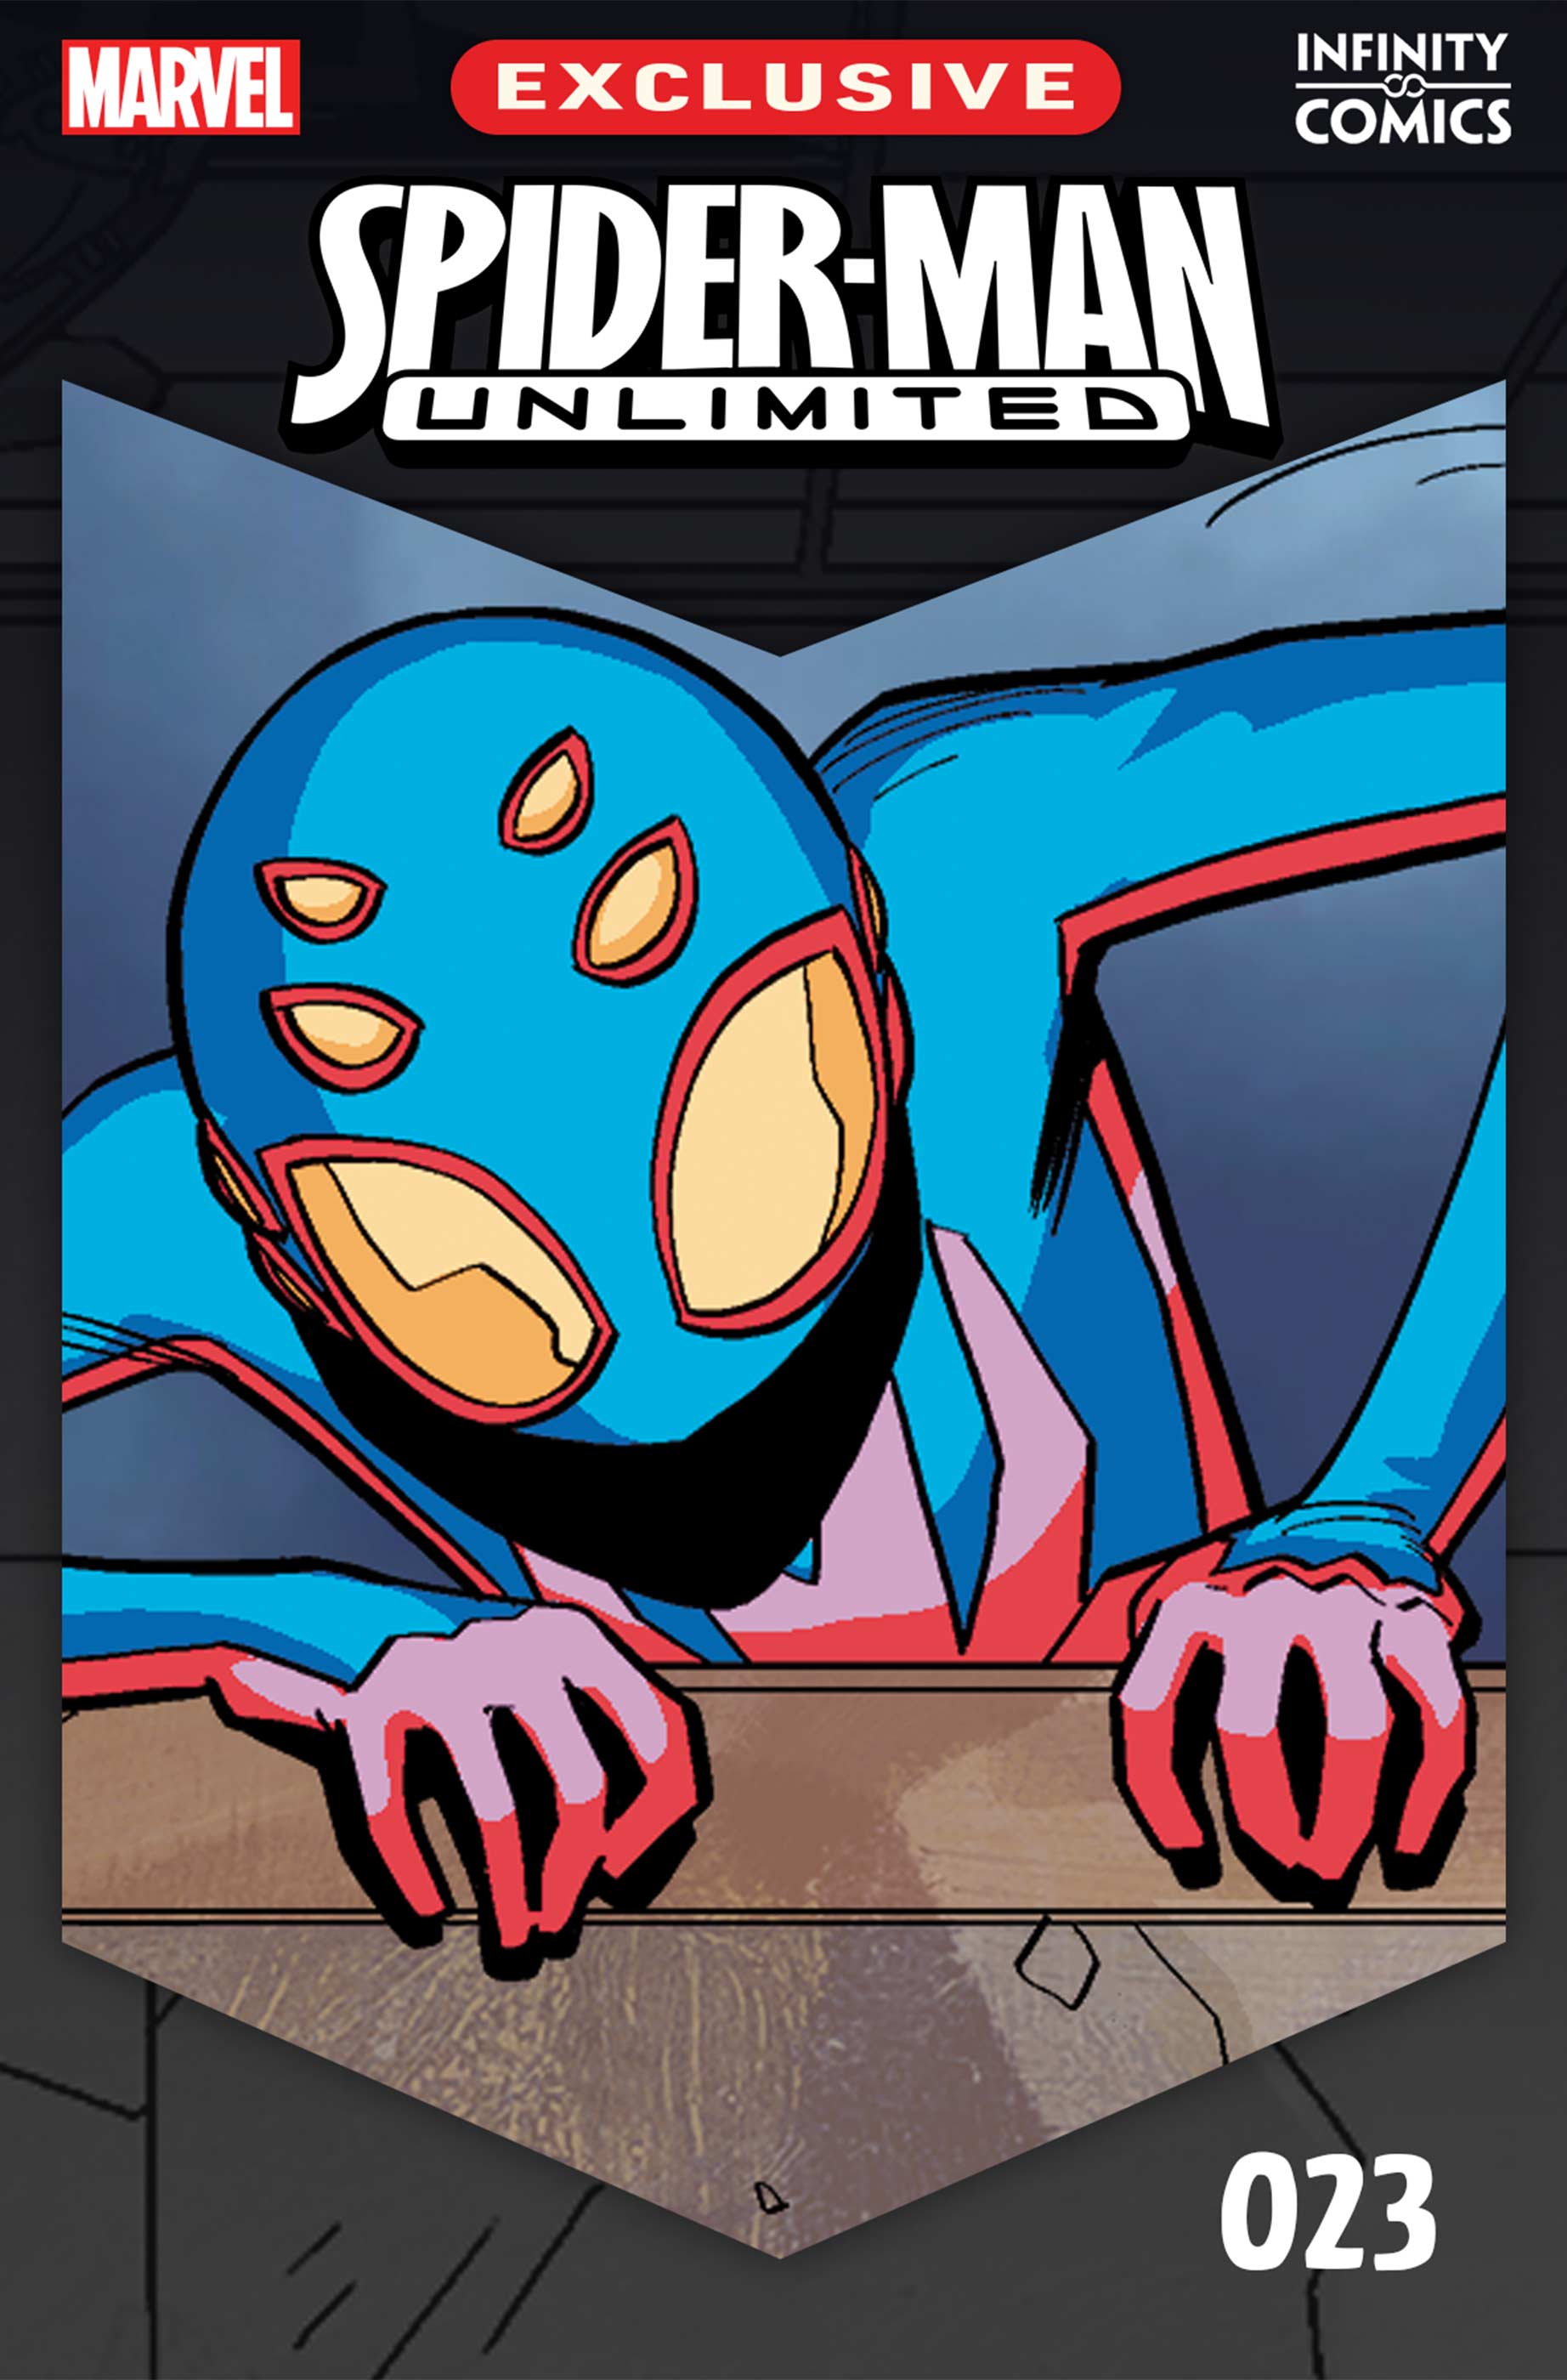 Spider-Man Unlimited Infinity Comic (2023) #23